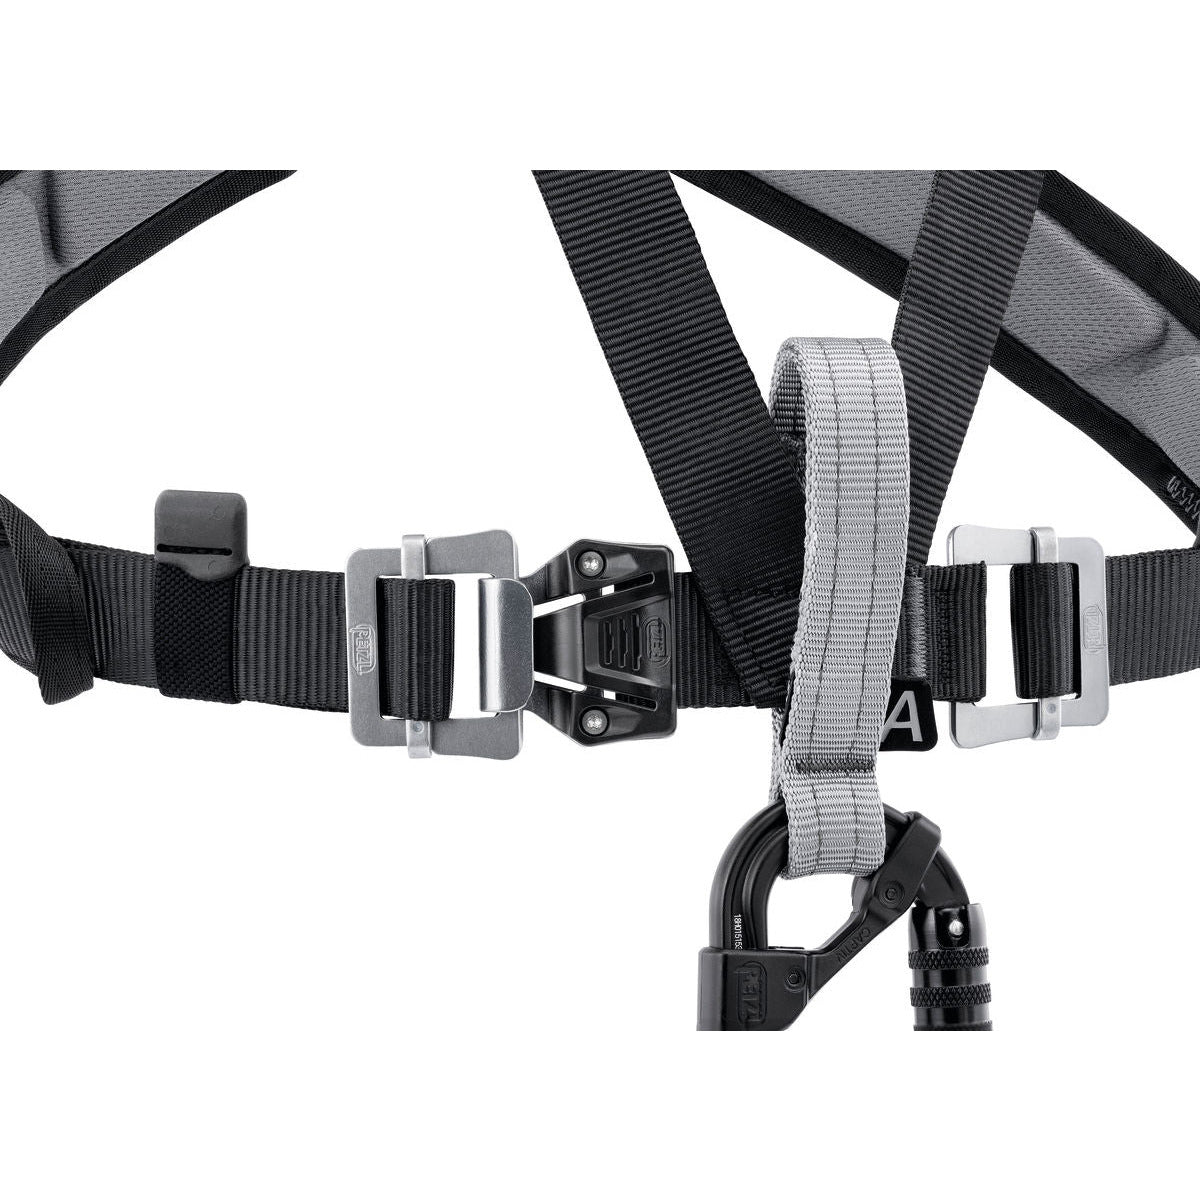 Chest'Air Chest Harness